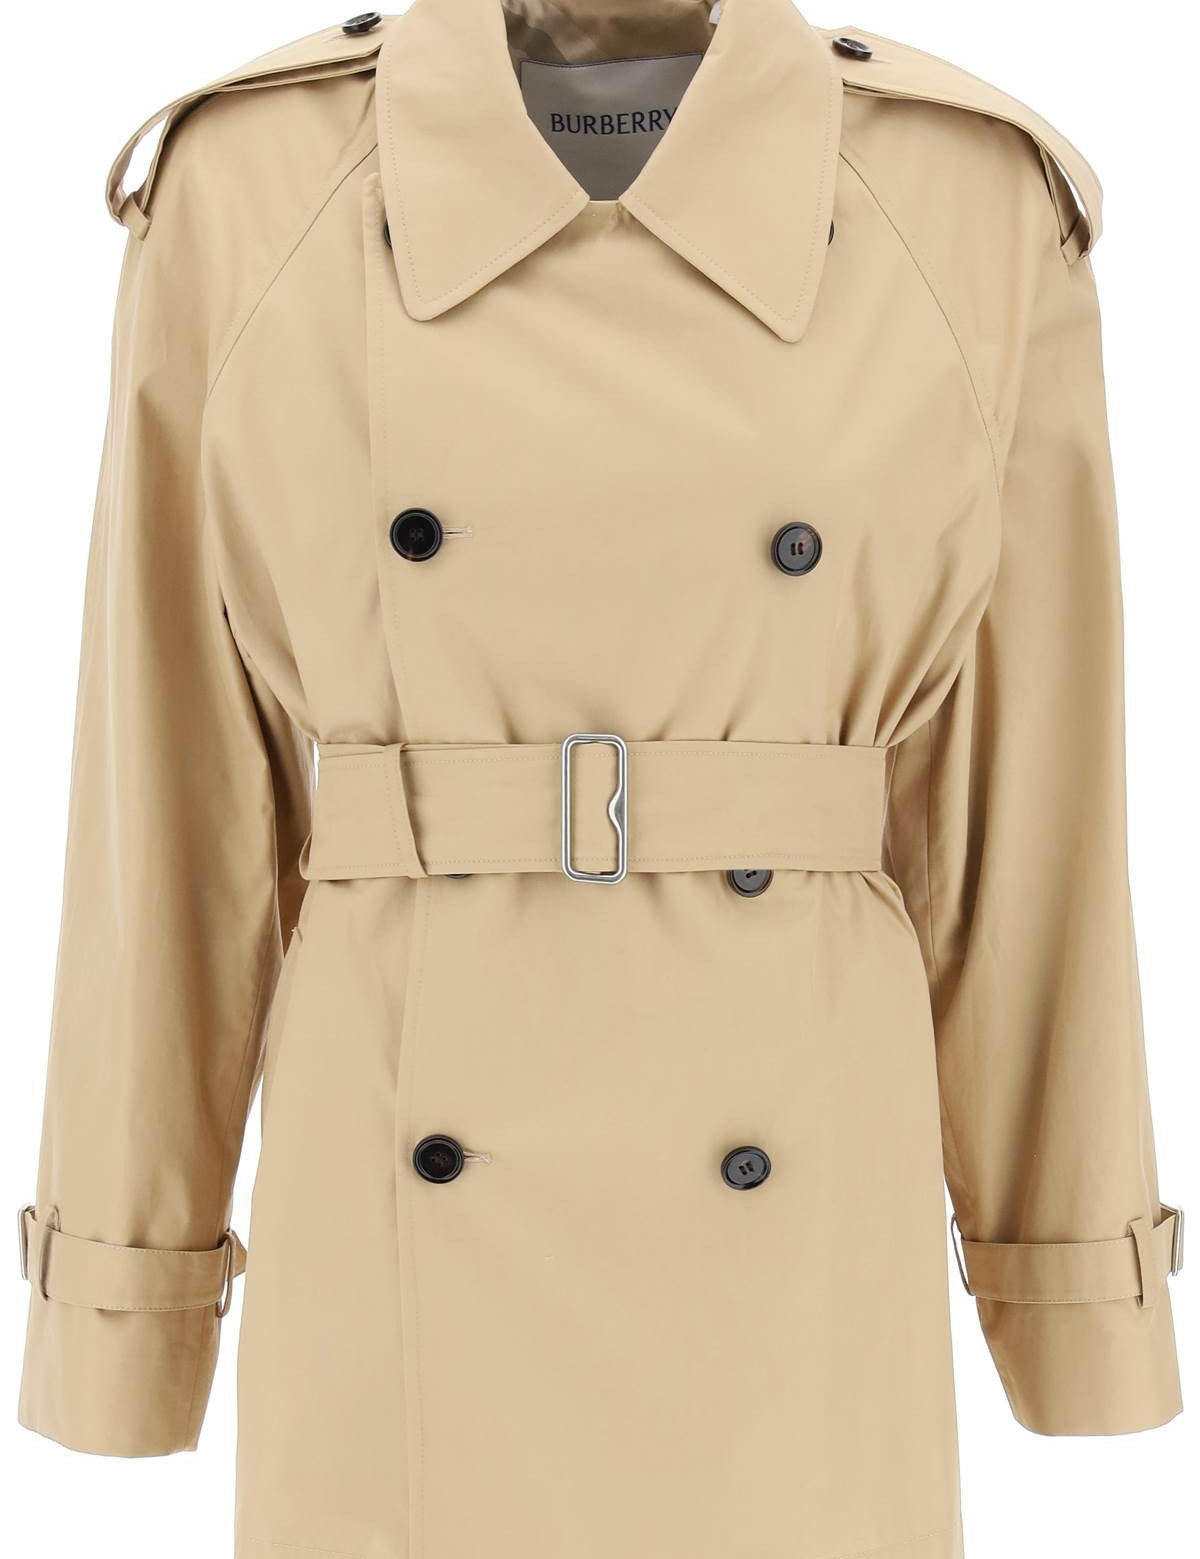 burberry-double-breasted-midi-trench-coat.jpg